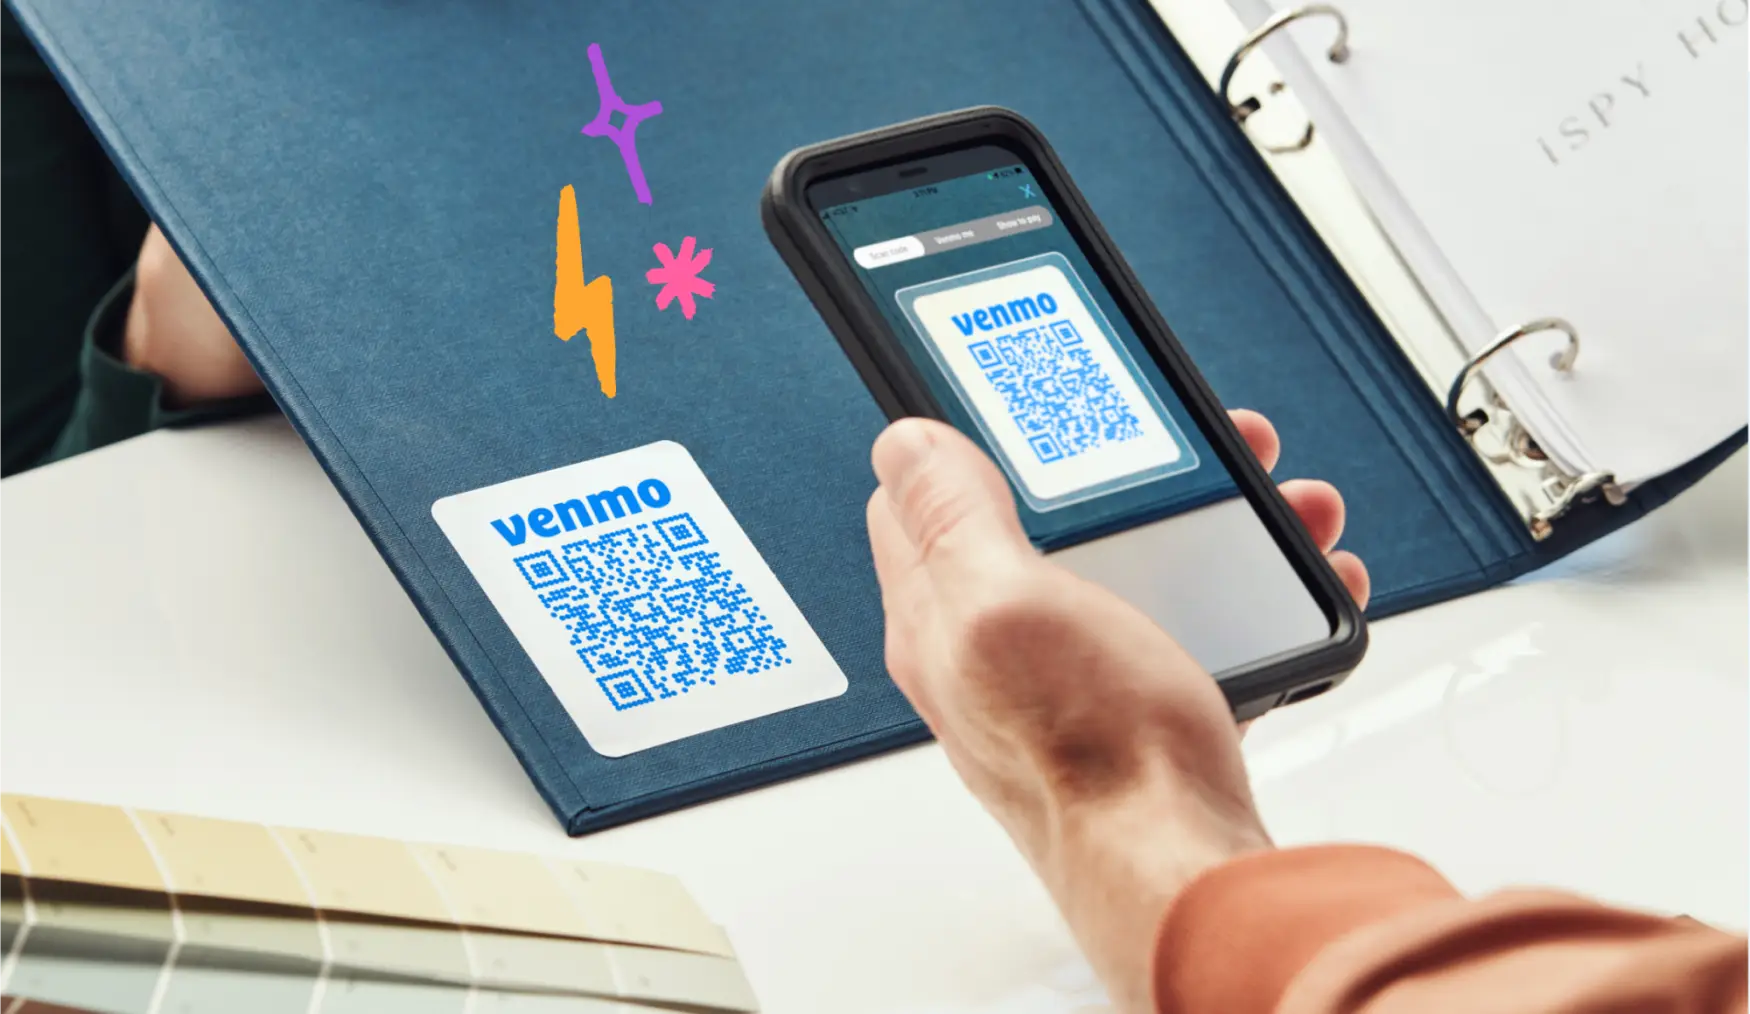 How to Use the Venmo QR Code to Transfer Money on Your Smartphone